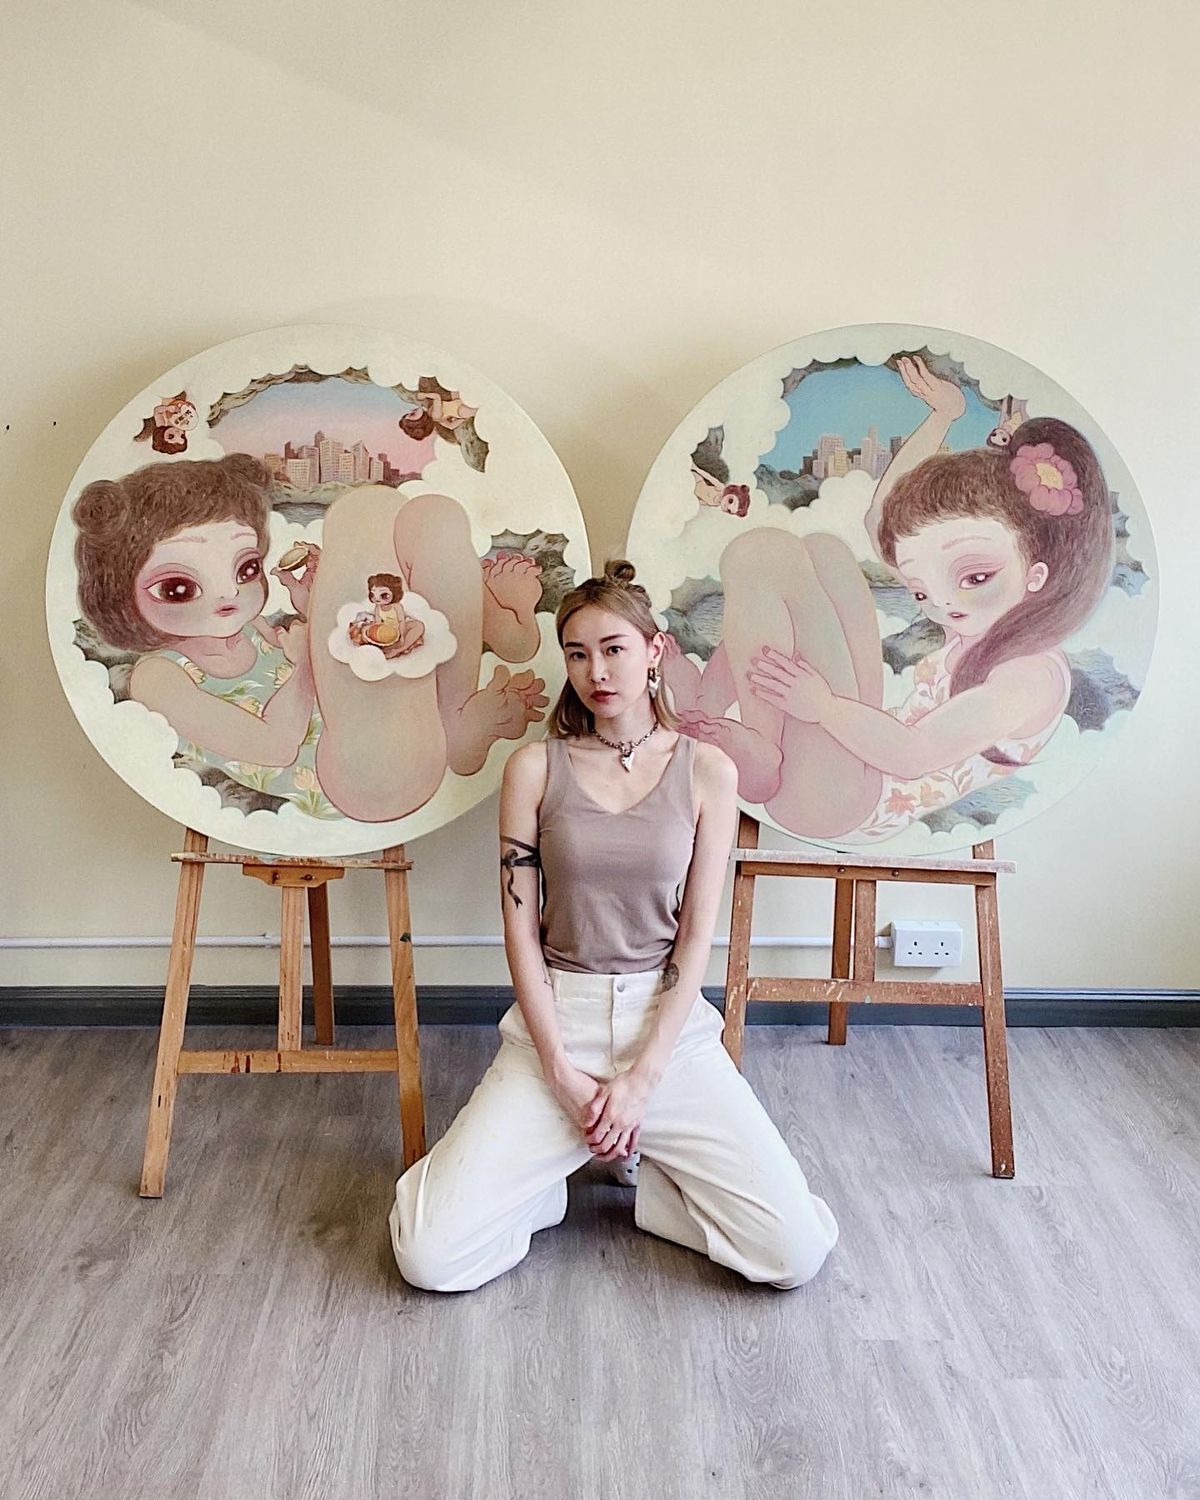 Visual artist Afa Annfa on solitude, longing and being an artist in Hong Kong